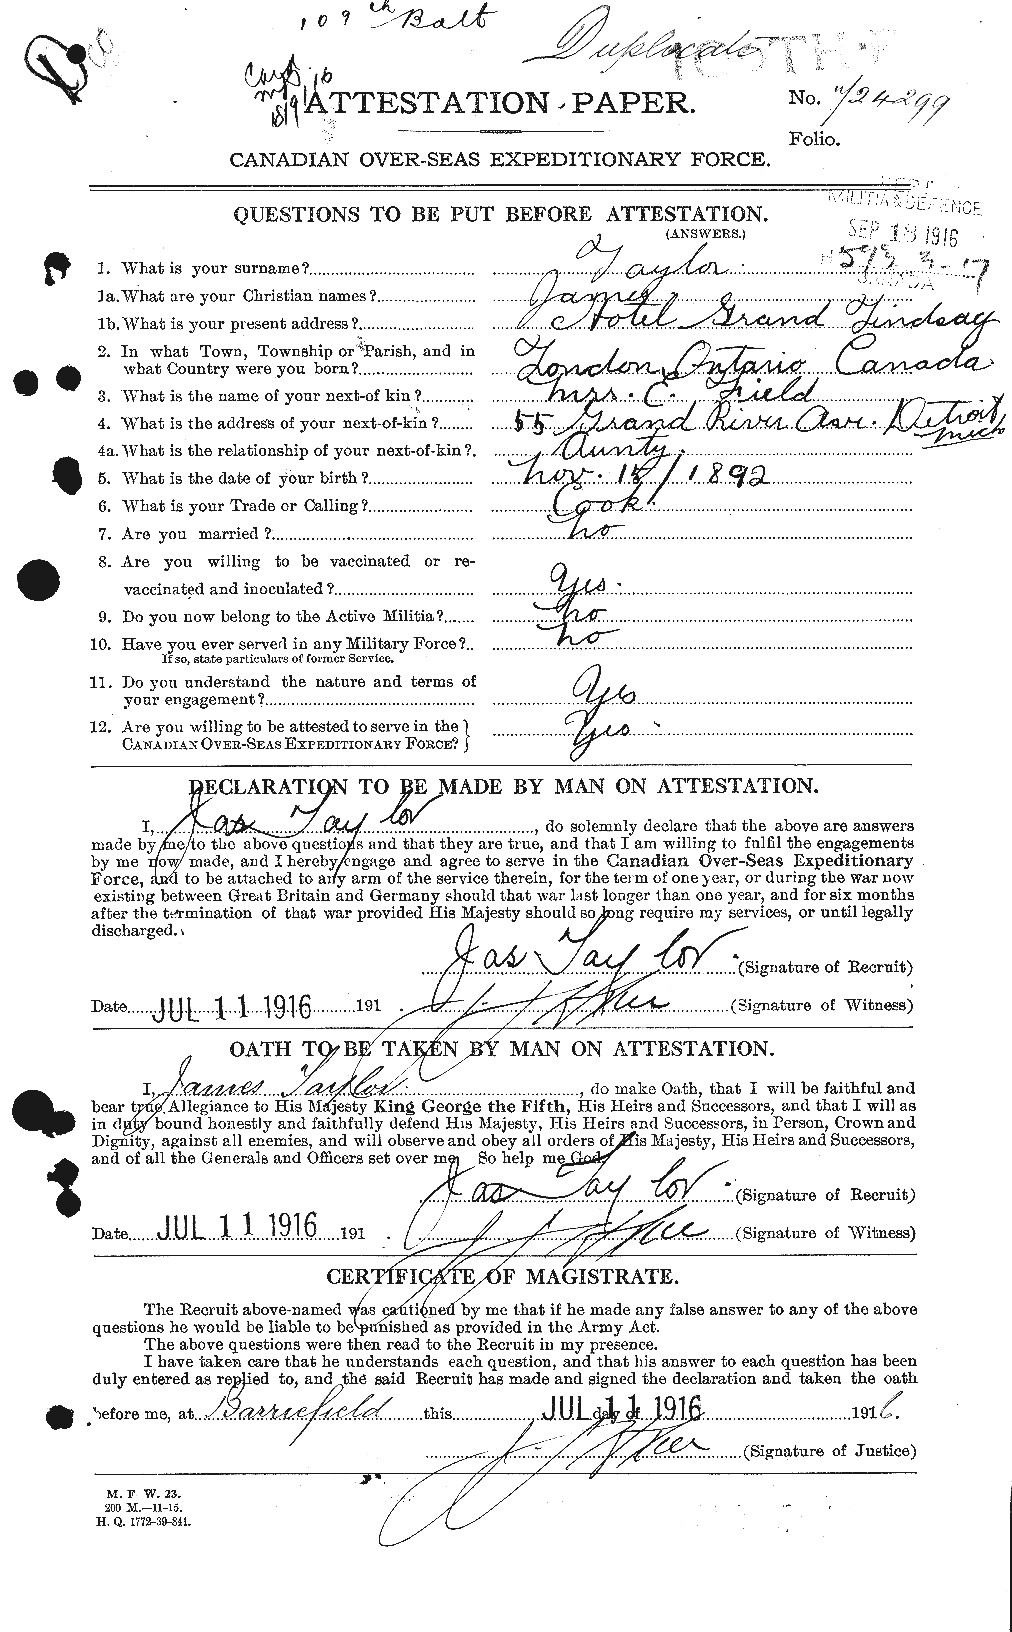 Personnel Records of the First World War - CEF 626679a